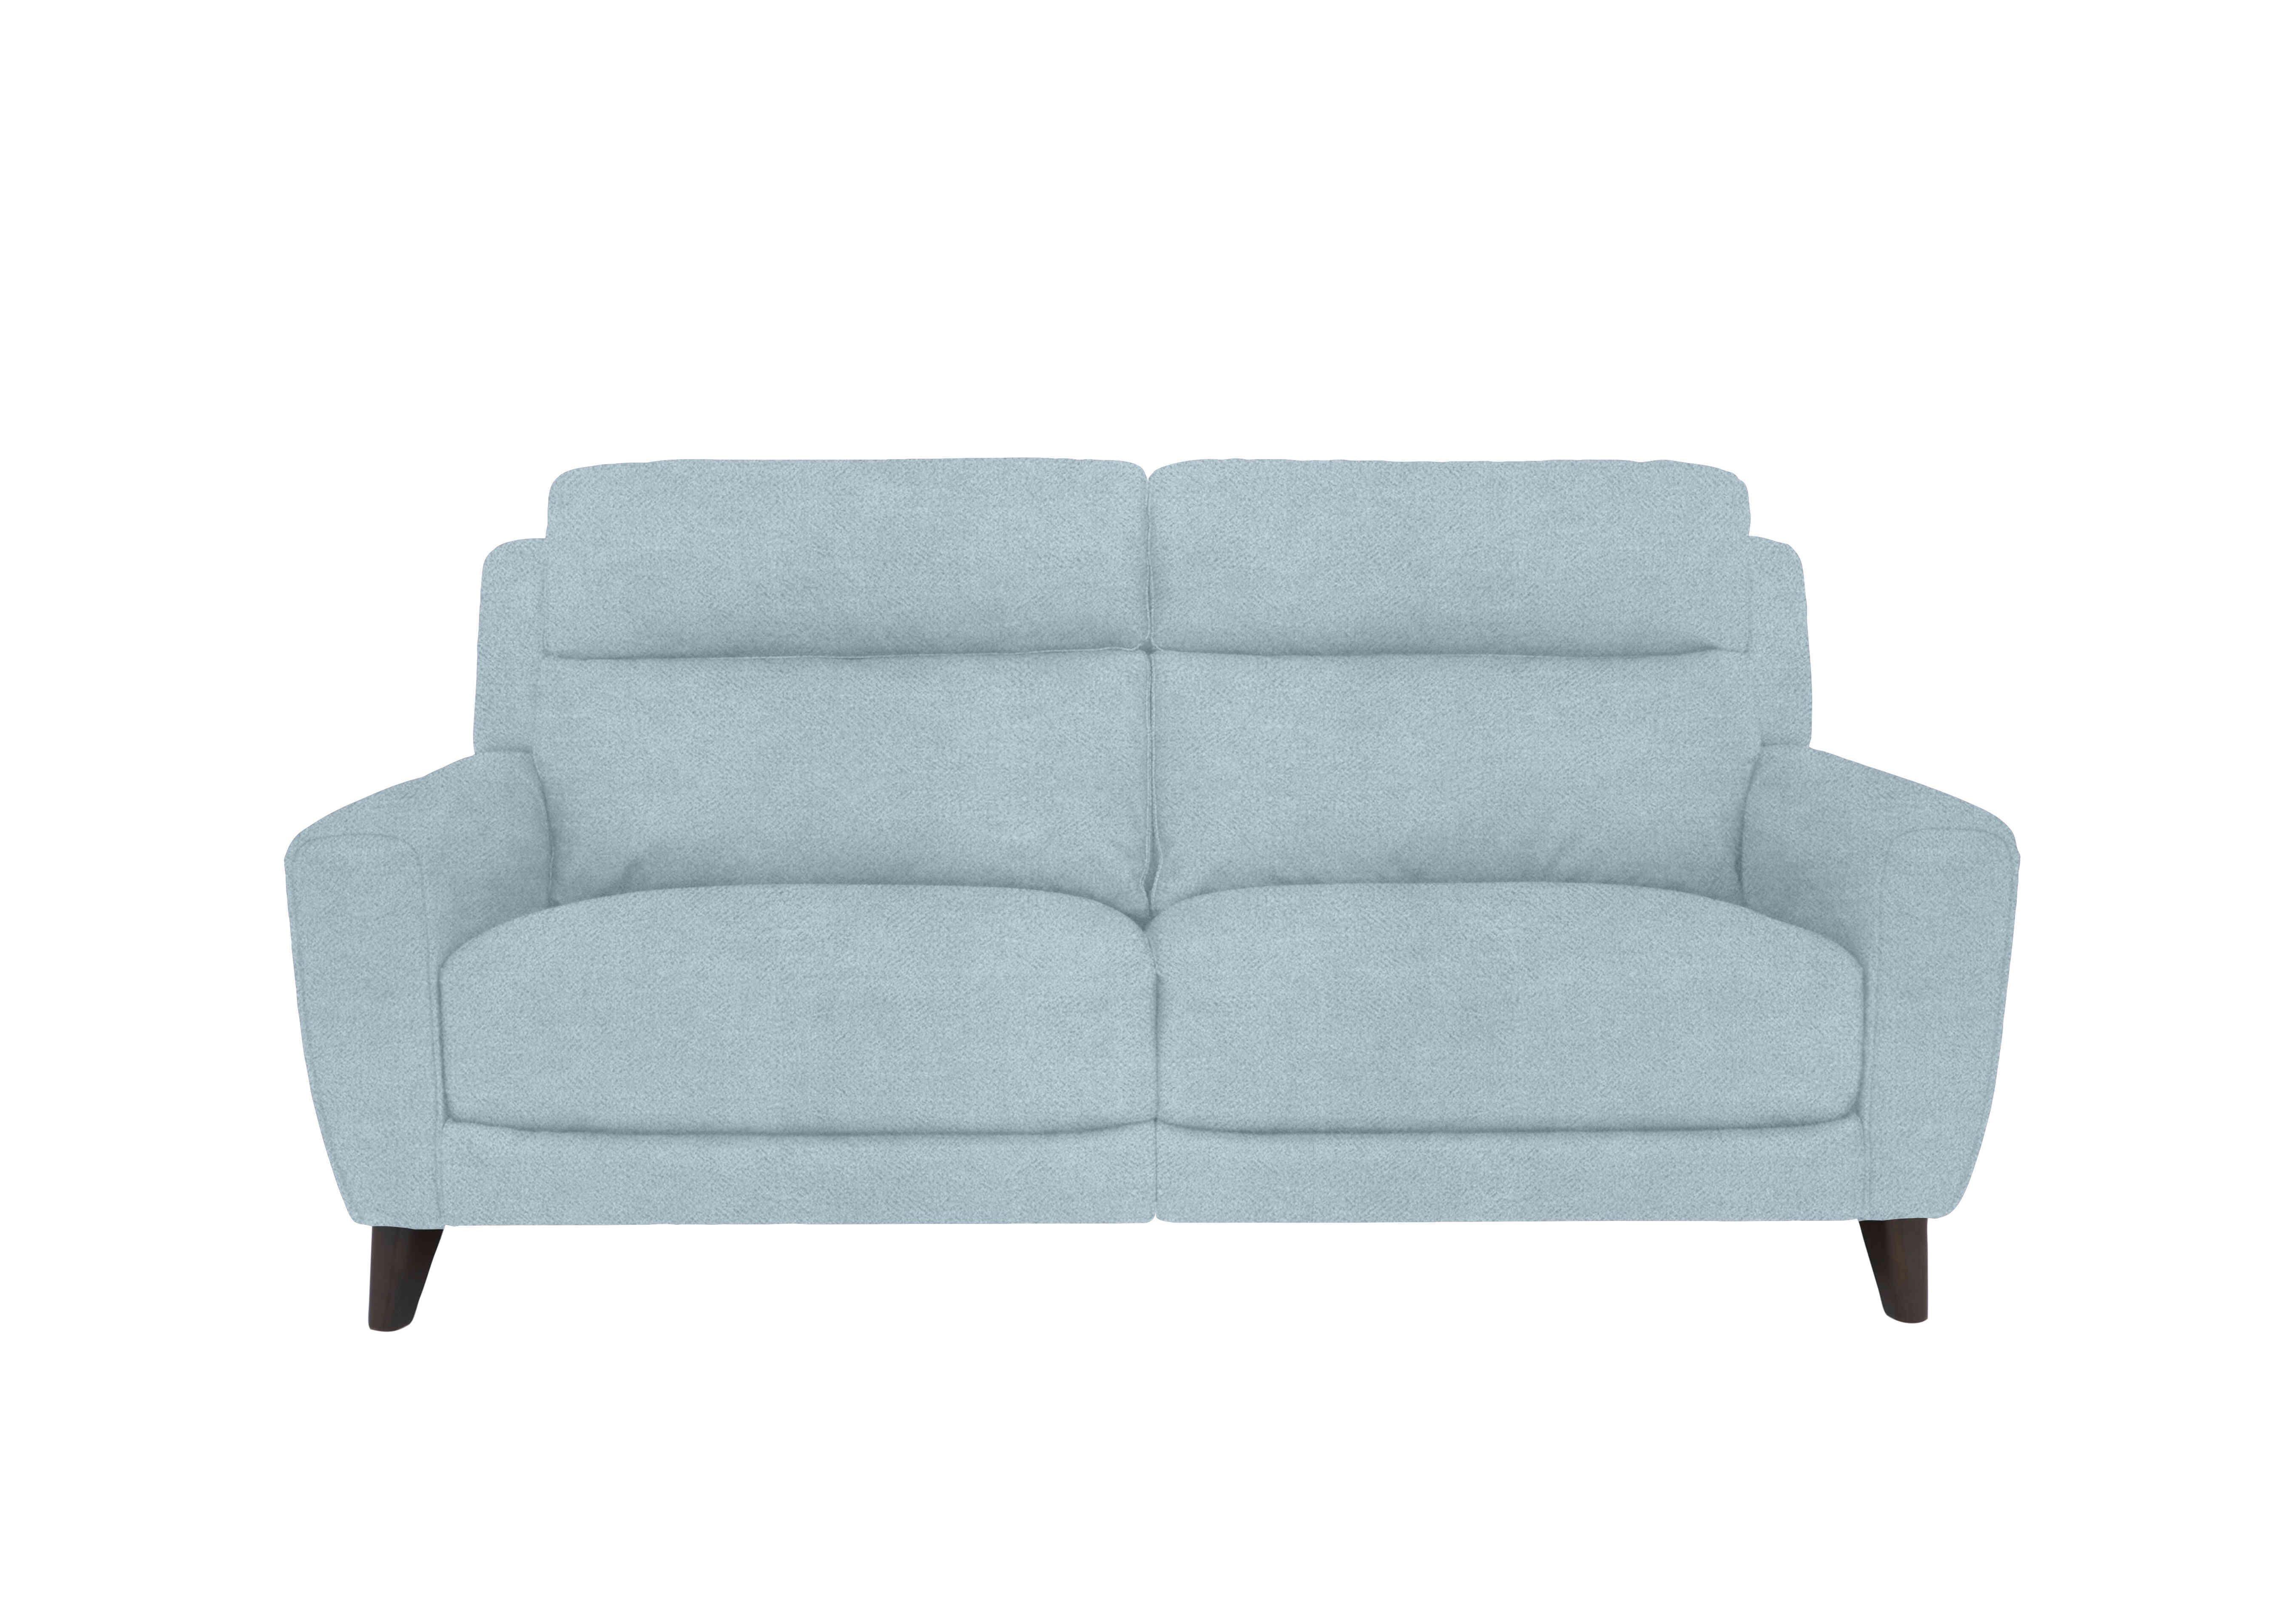 Zen 3 Seater Fabric Power Recliner Sofa with Power Headrests and Power Lumbar in Fab-Meo-R17 Baby Blue on Furniture Village